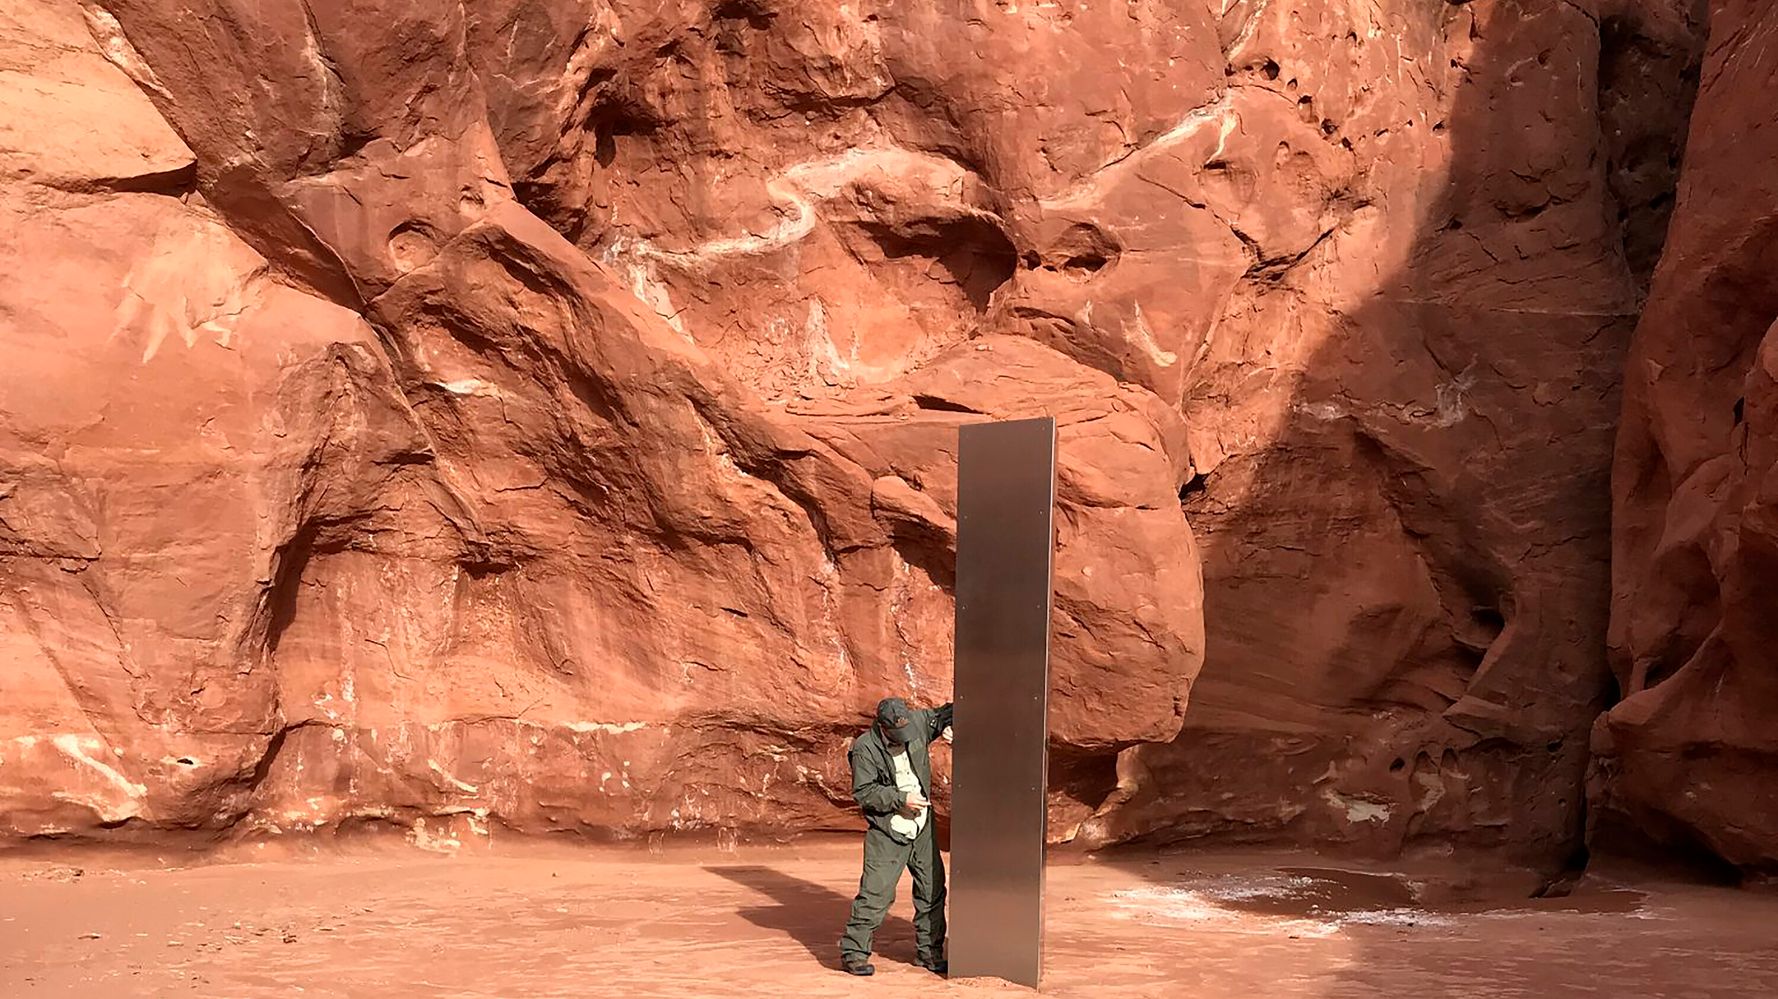 Monolith Visitor Says It Was Toppled By Group Who Said 'Leave No Trace'